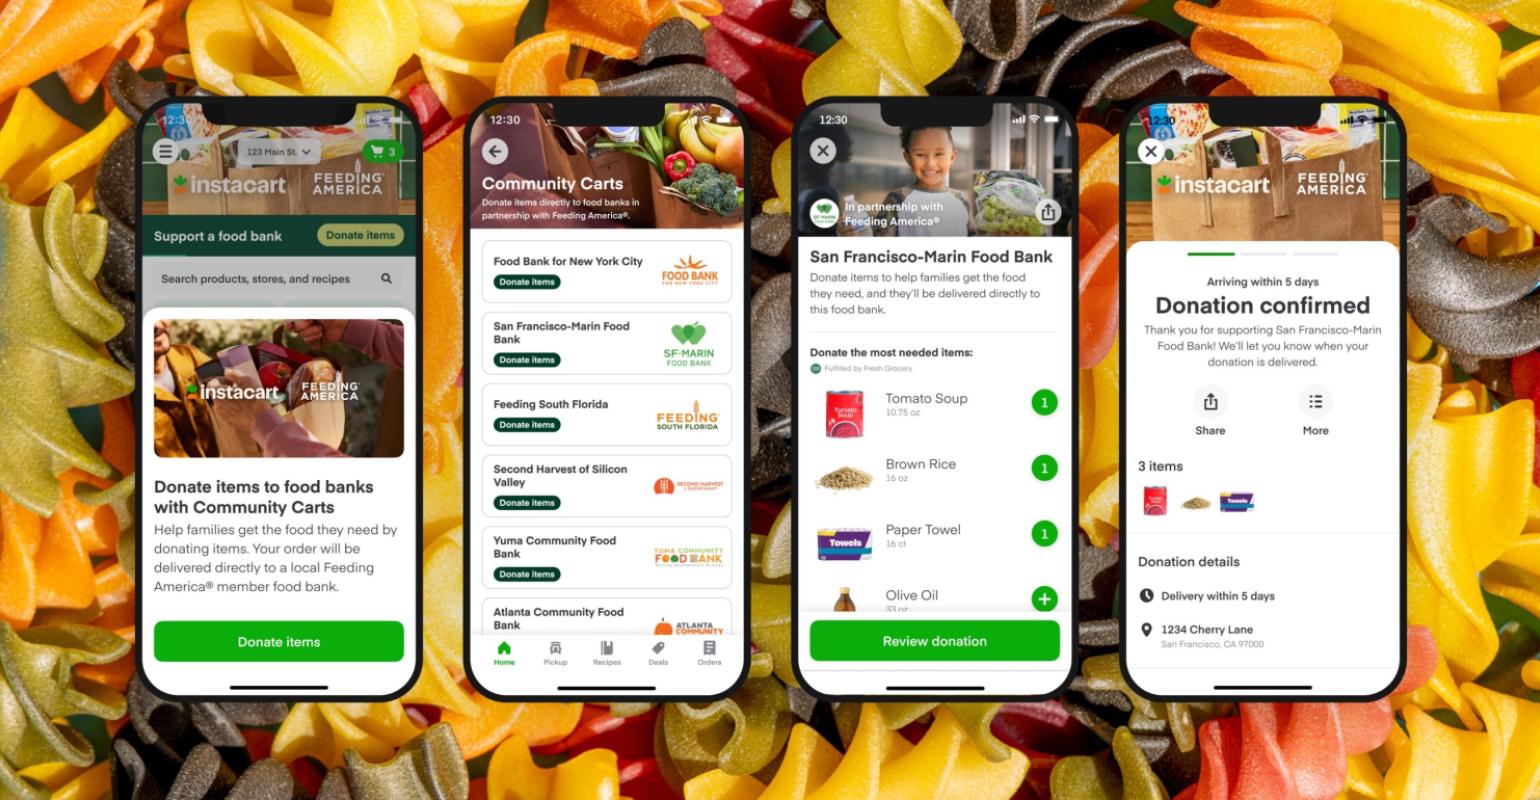 Instacart moves to streamline food bank donation